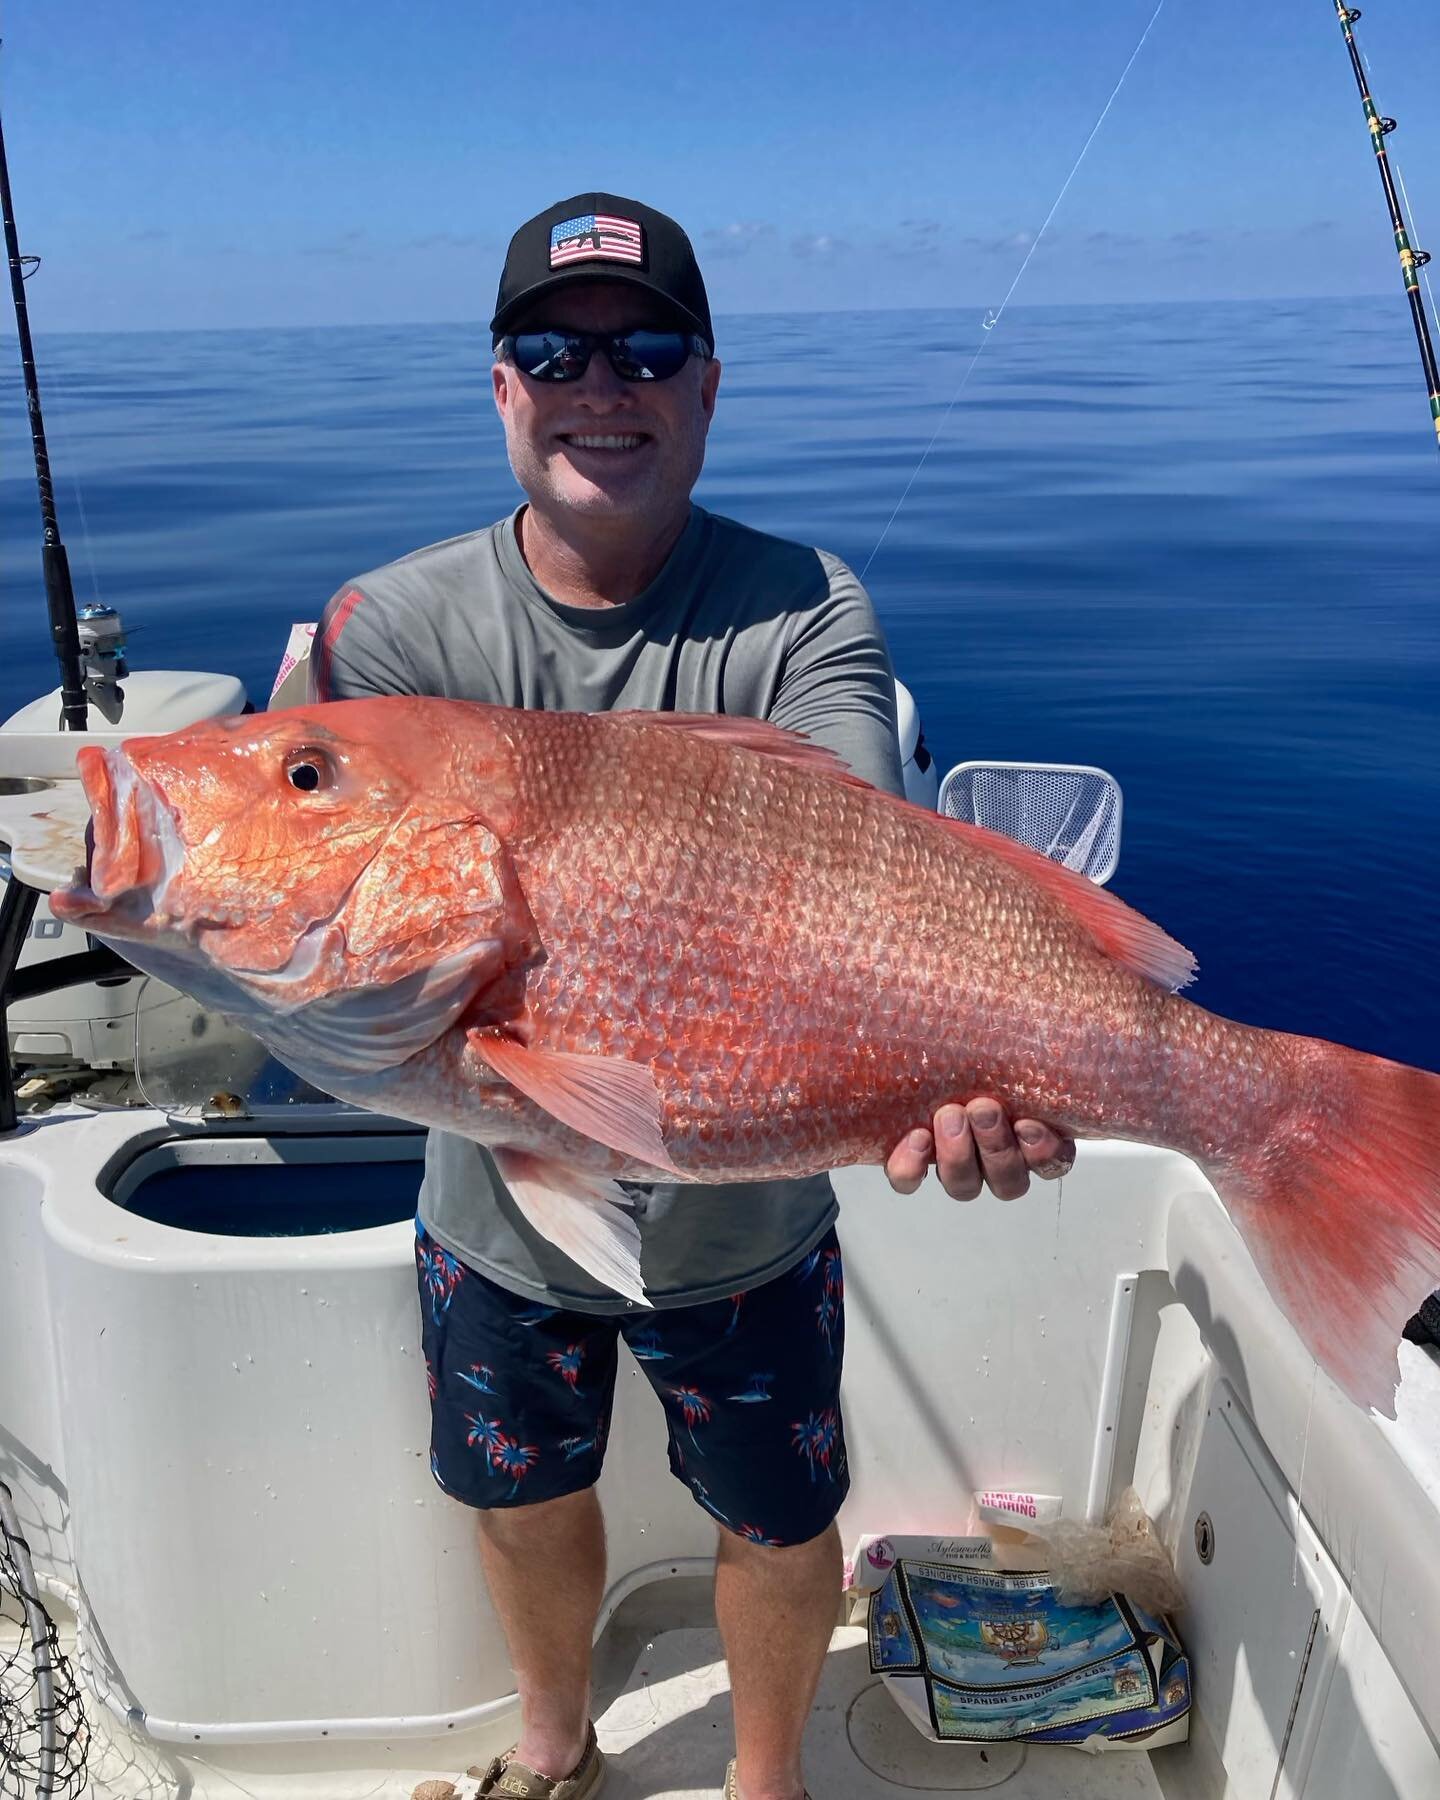 @capt_major &amp; crew put the heat down on them yesterday on a 6 hour excursion lots of days available for #redsnapper season 🎣🐟
&bull;
&bull; 
For booking contact (941) 545-0924 (813) 731-5325
@yellowfin_official @rhodanmarine @simradyachting @st